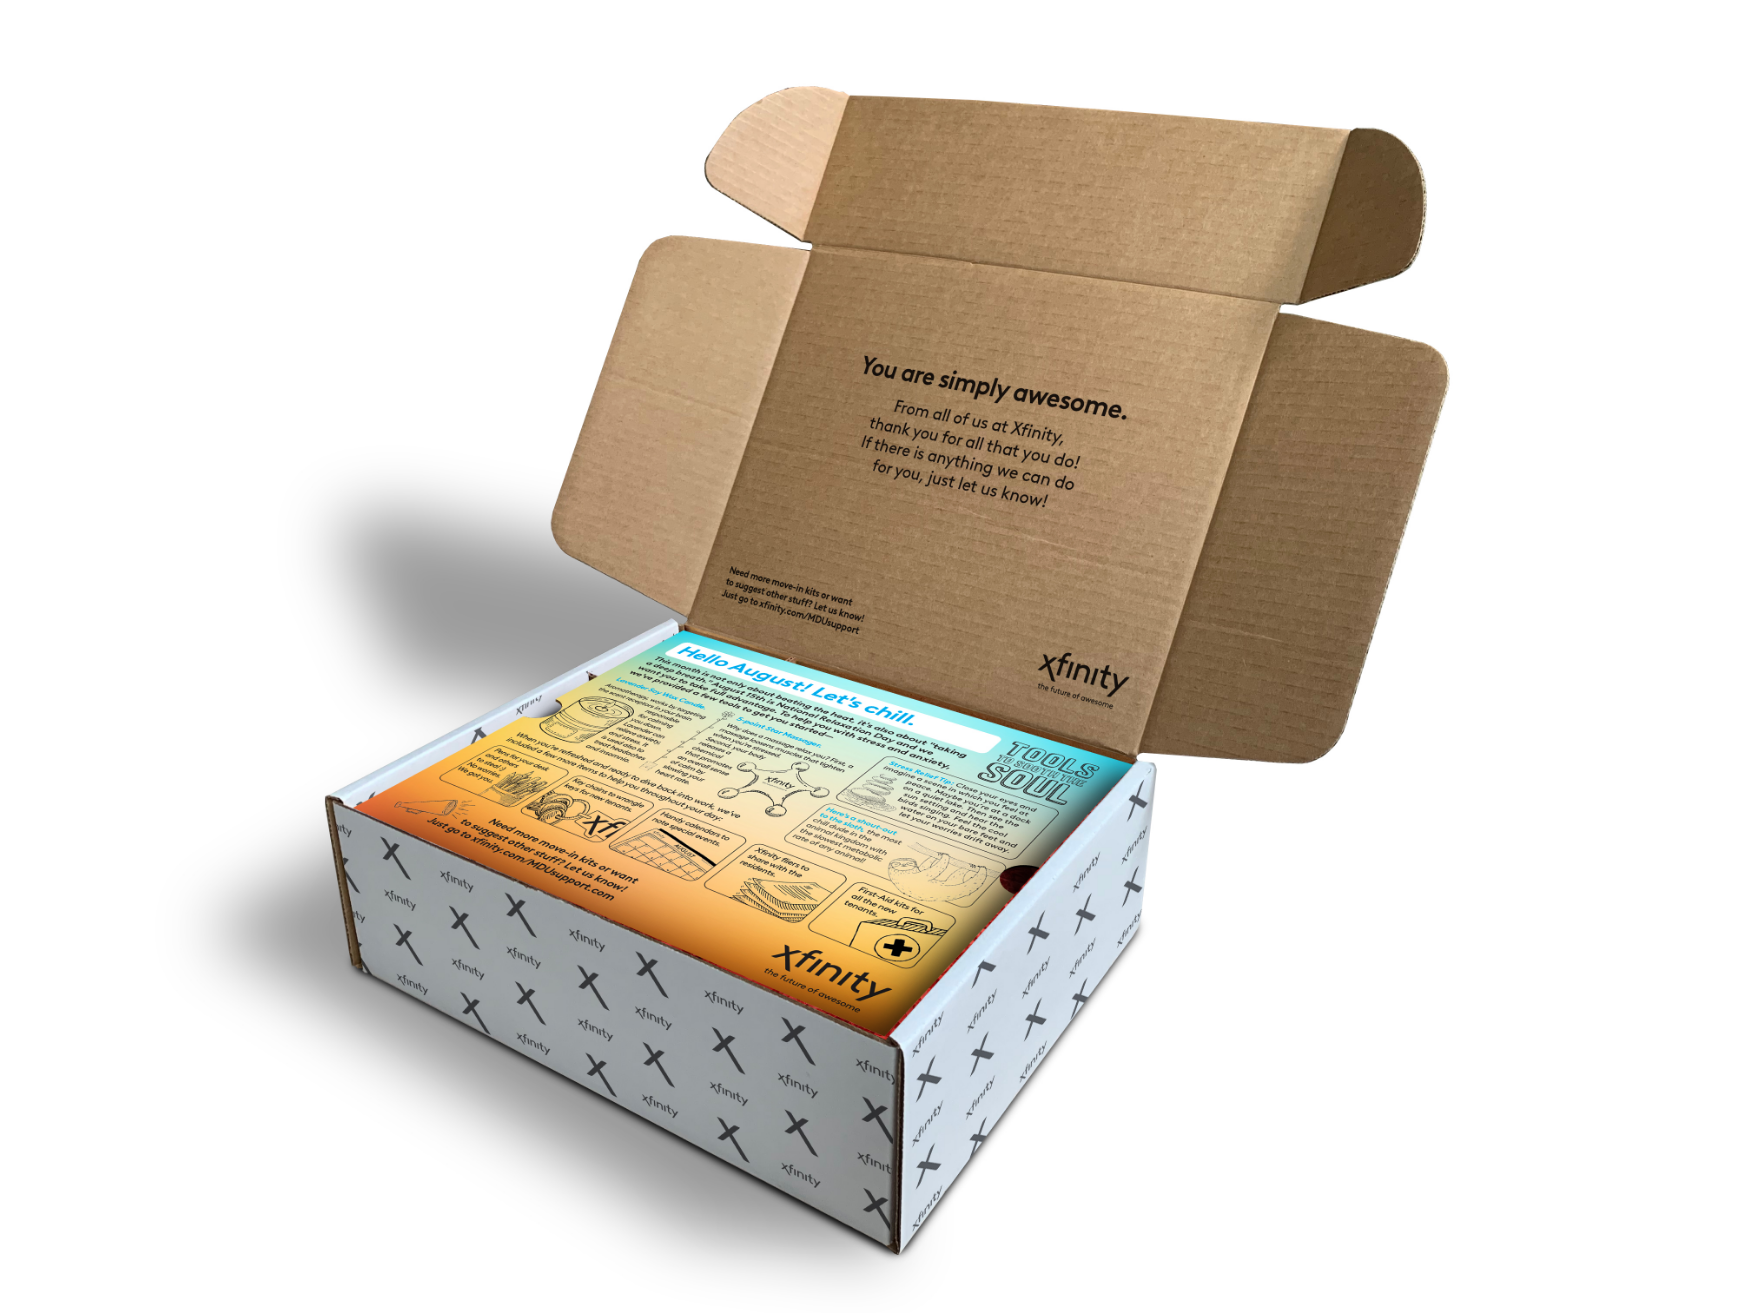 An open Comcast subscription box with a compliment printed inside the lid and colorful contents visible, suggesting a personalized customer experience or a special package.